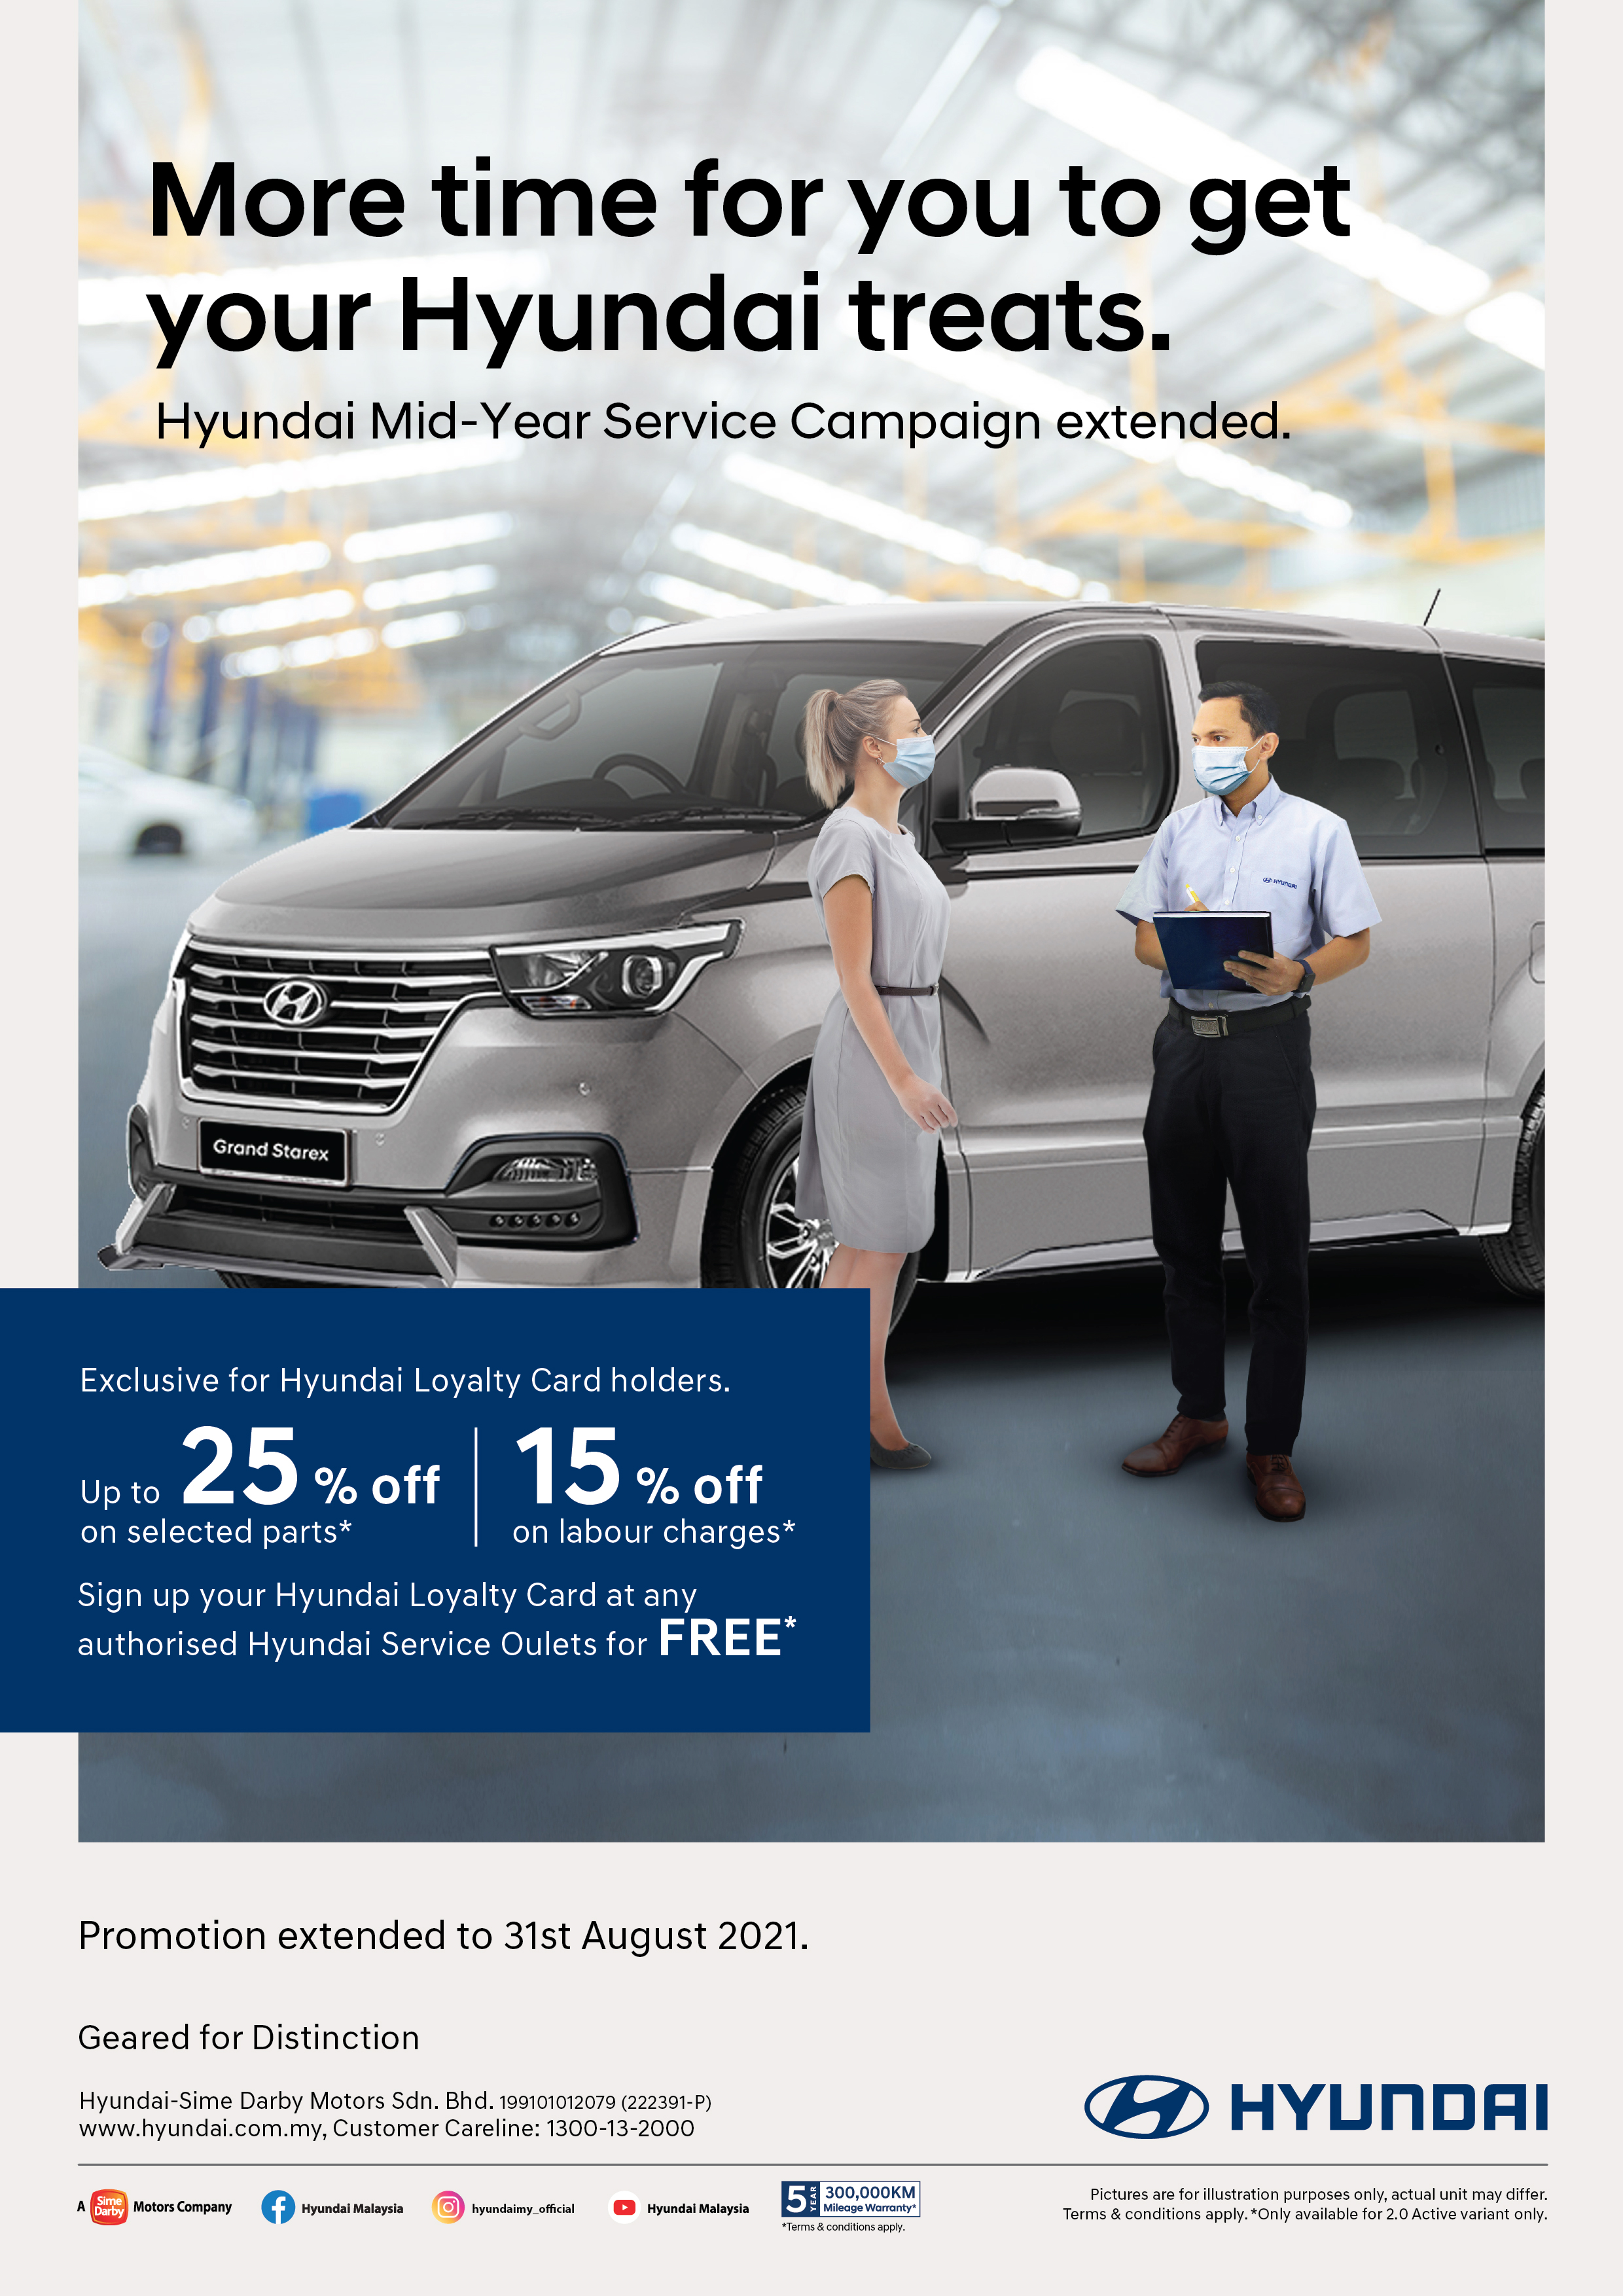 More time for you to get your Hyundai treats - Hyundai Mid-Year Service Campaign extended. Exclusive for Hyundai Loyalty Card holders. Up to 25% off on selected parts* | 15% off on labour charges*. Sign up your Hyundai Loyalty Card at any authorised Hyundai Service Outlets for FREE*. Promotion extended to 31st August 2021. Geared for Distinction.